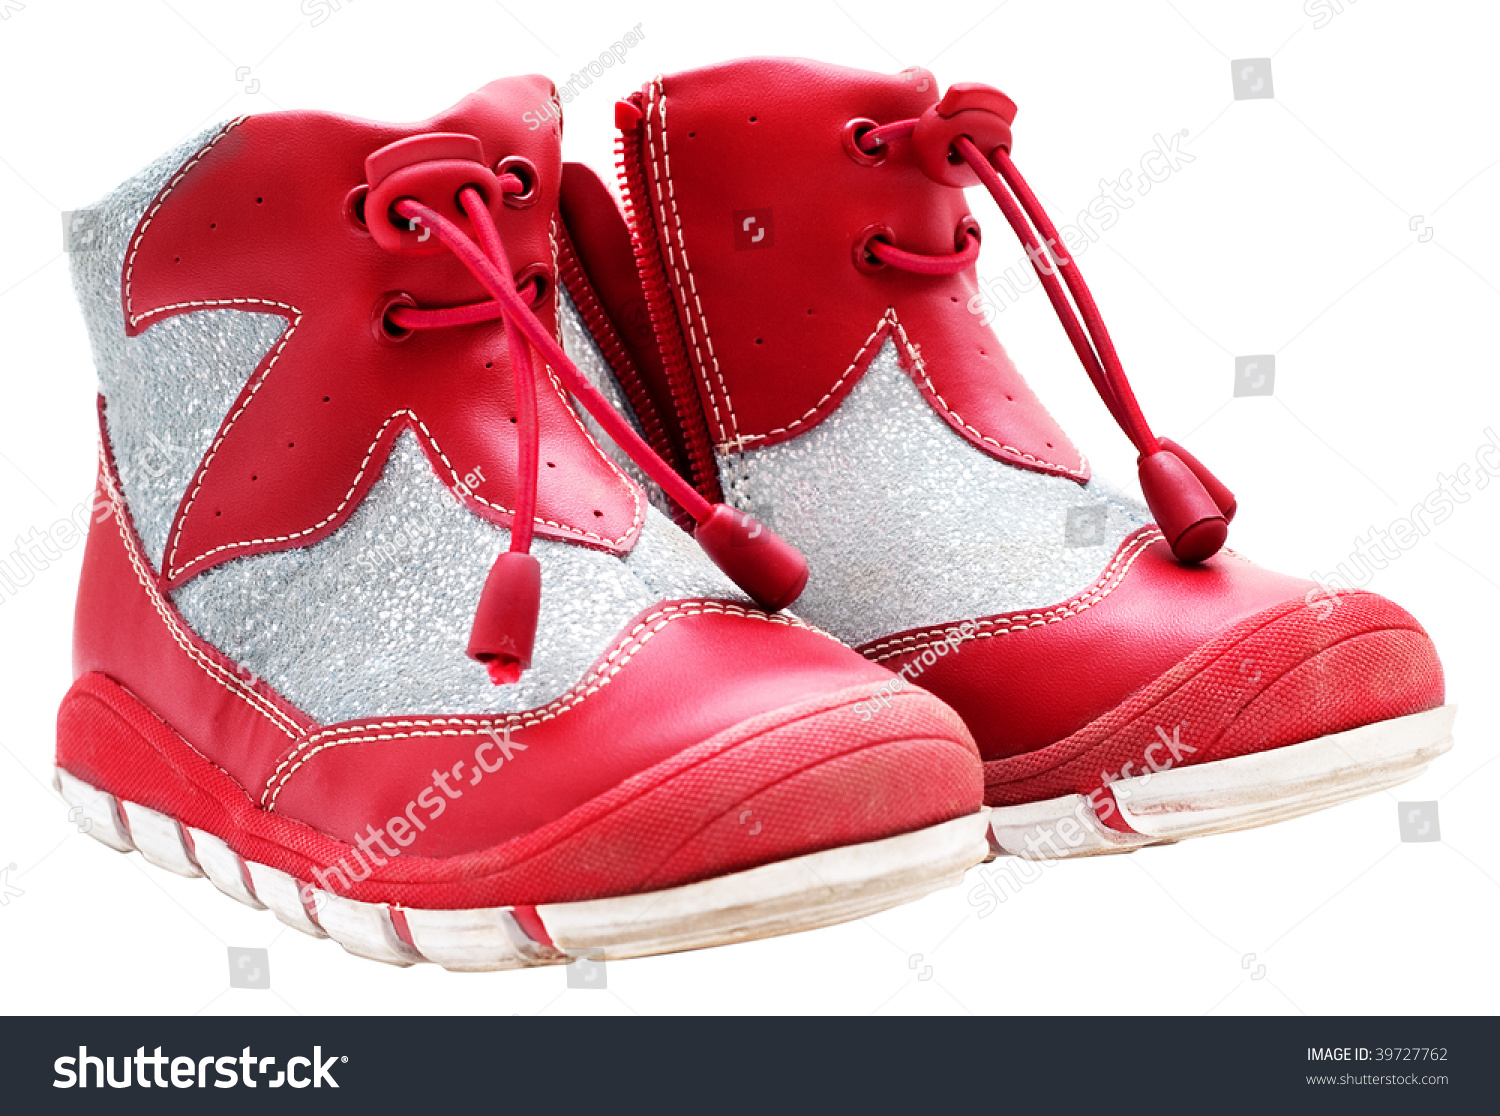 Children'S Shoes Isolated On A White Background Stock Photo 39727762 ...